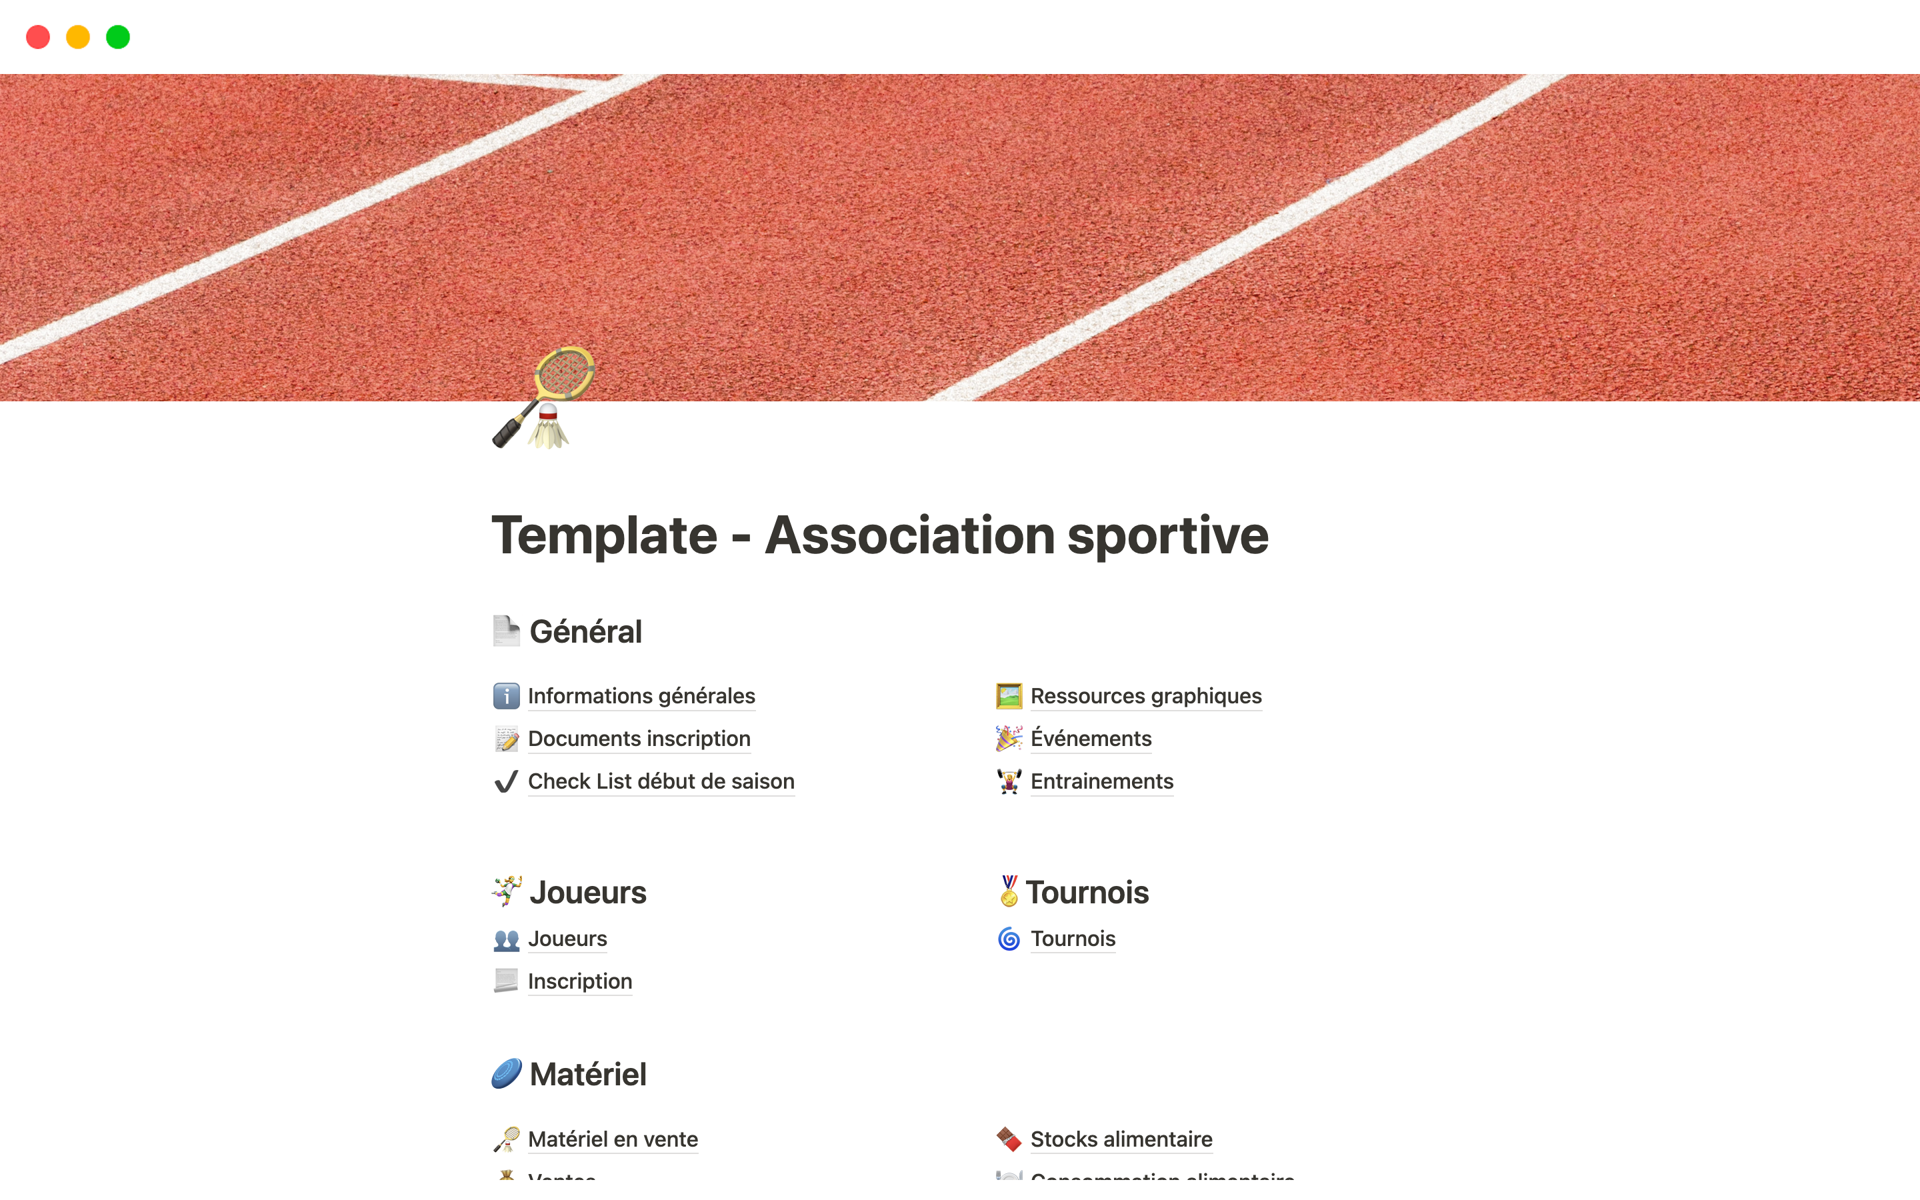 A template preview for Template - Association sportive